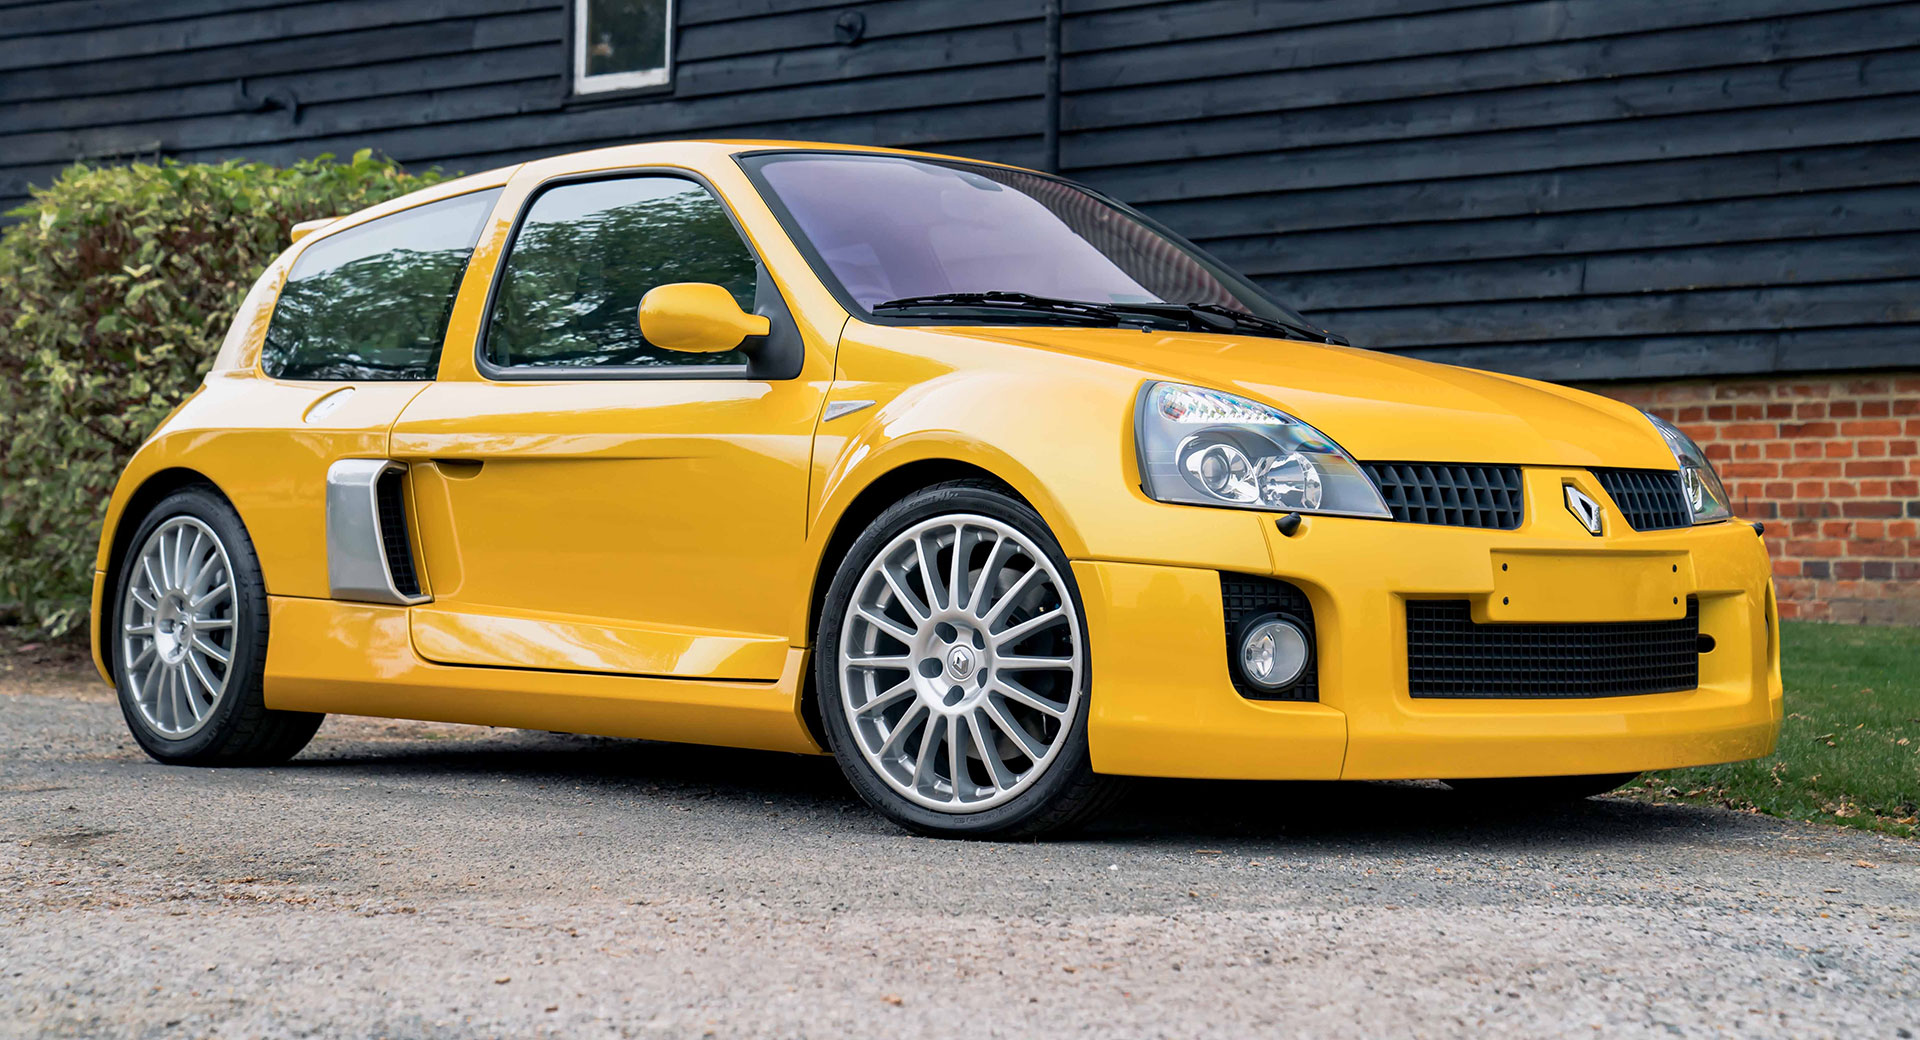 A Mint 980-Mile Renault Clio V6 Just Sold For A Record Price